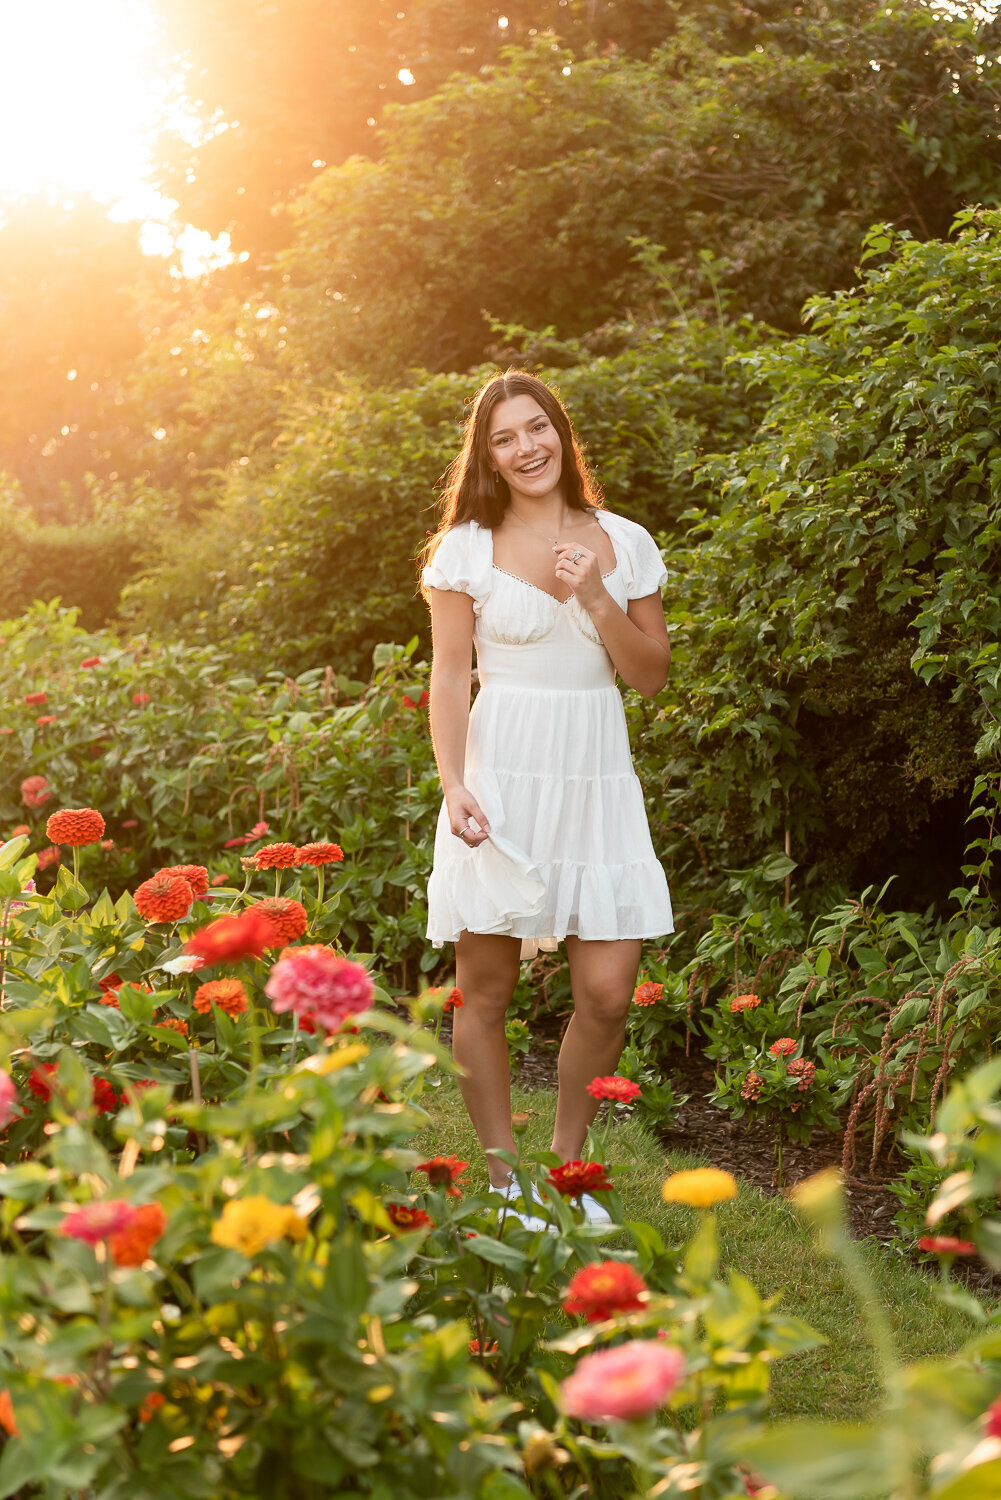 Senior girl smiling at the camera in a garden of flowers |Sharon Leger Photography | Canton, CT Newborn & Family Photographer